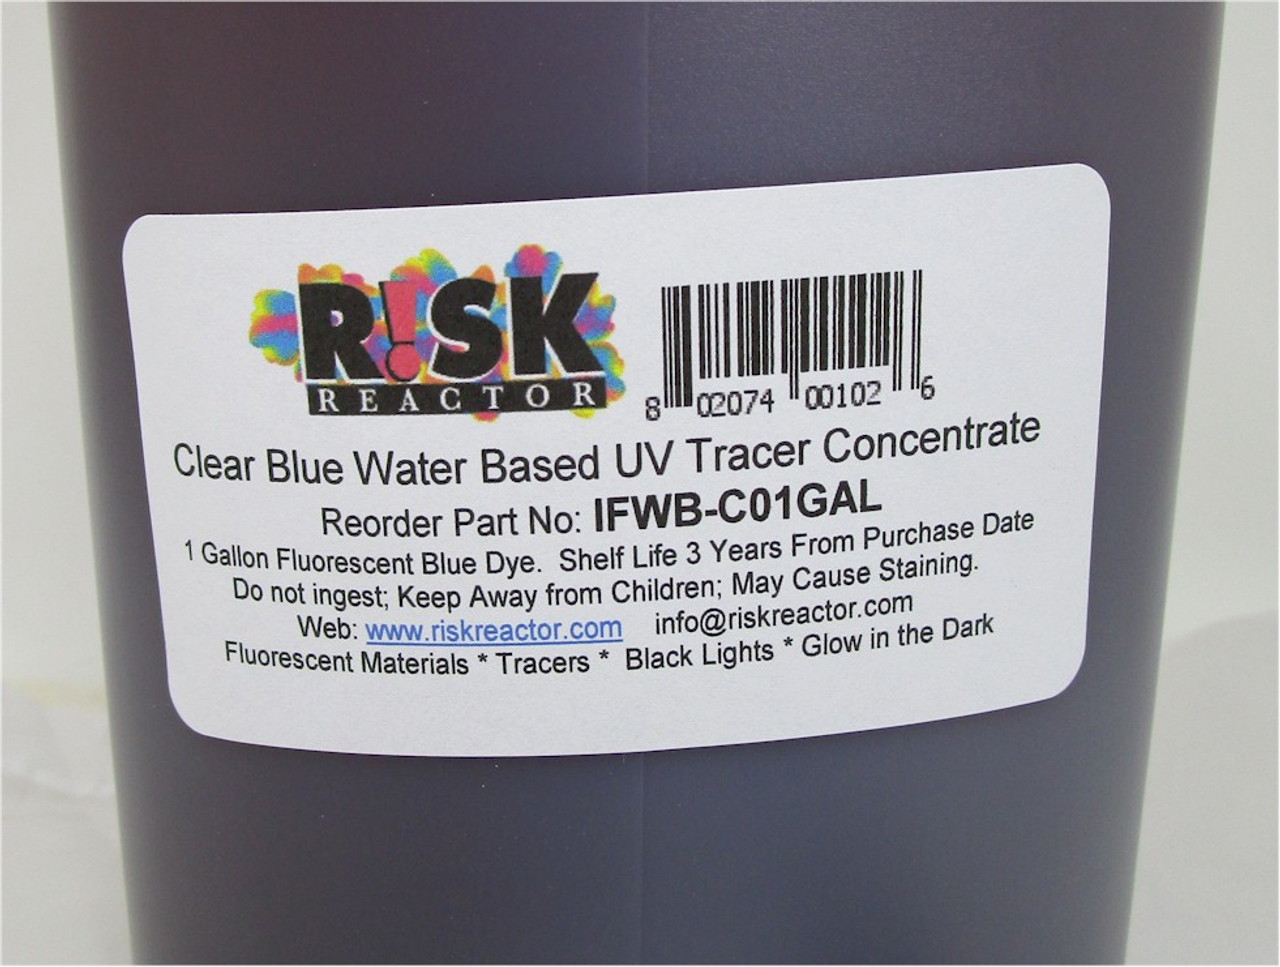 https://cdn11.bigcommerce.com/s-nl905bb/images/stencil/1280x1280/products/1352/4020/IFWB-C01GAL_gallon_of_clear_UV_blue_fluorescent_water_tracer__03221.1560039791.jpg?c=2?imbypass=on